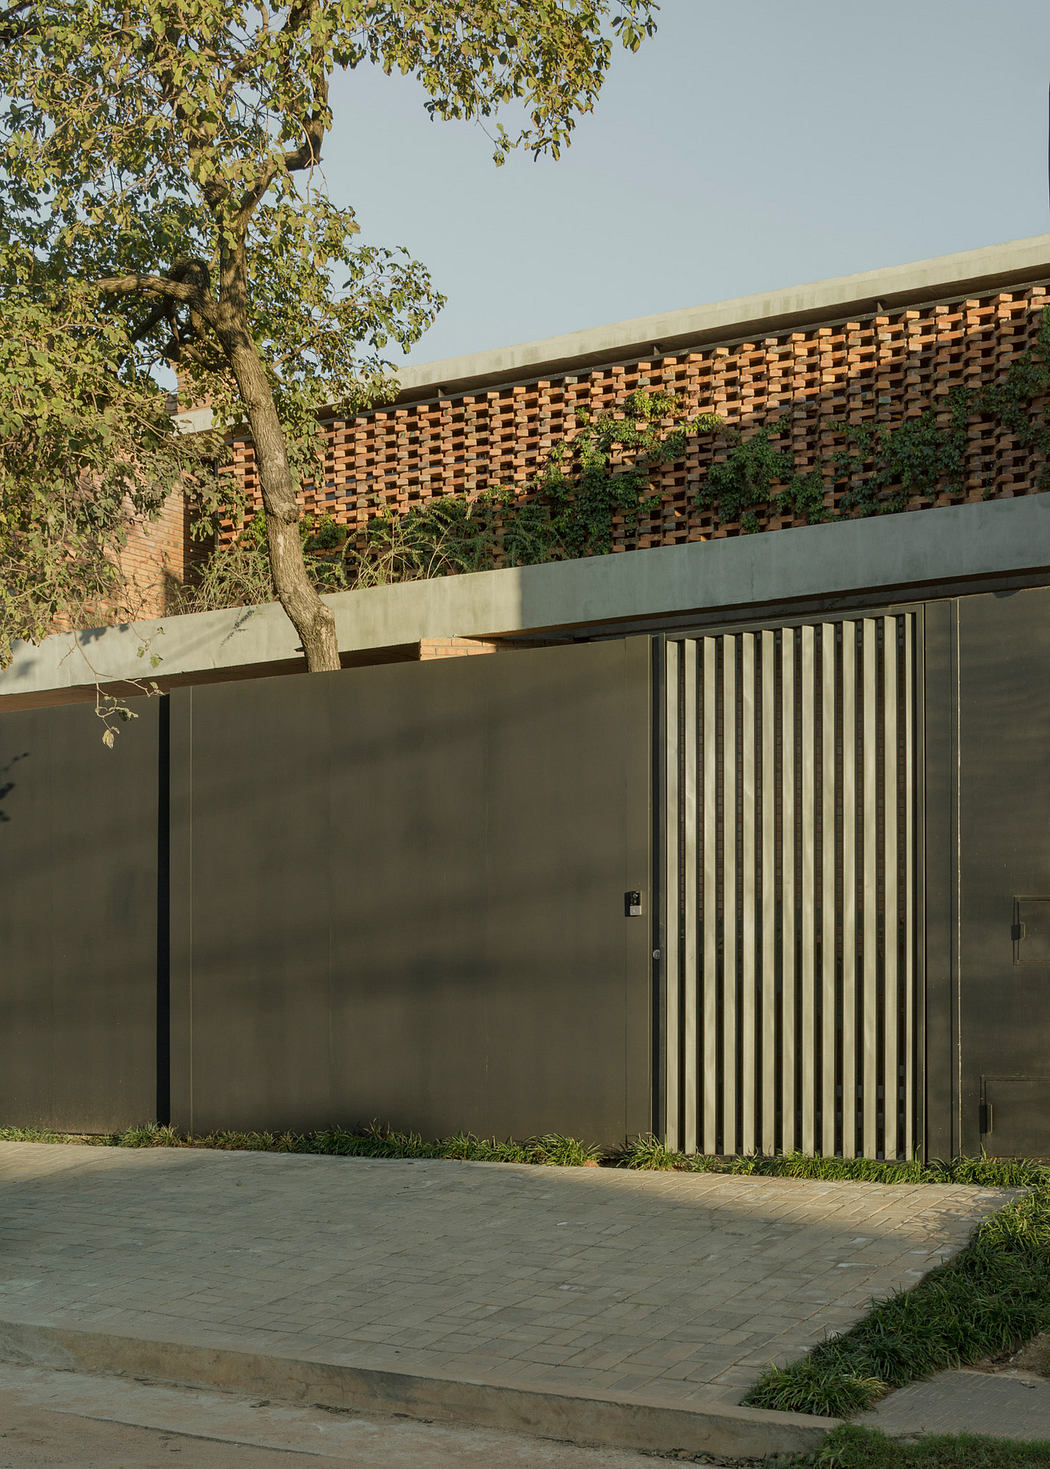 Contemporary wall with vertical slat gate and brickwork detailing.